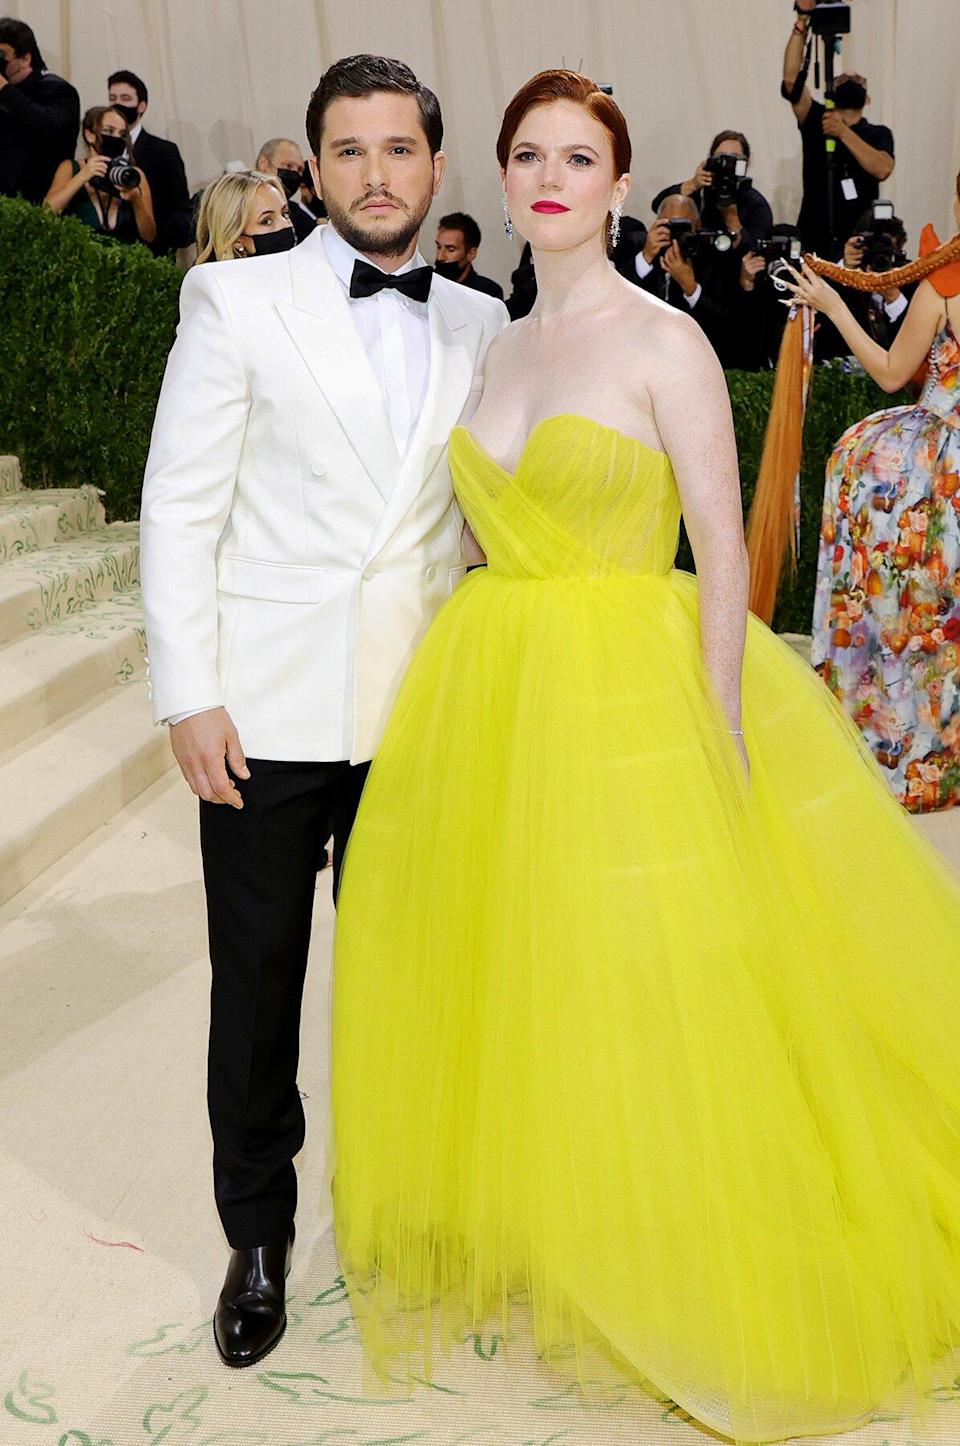 Kit Harington and Rose Leslie attend The 2021 Met Gala Celebrating In America: A Lexicon Of Fashion at Metropolitan Museum of Art on September 13, 2021